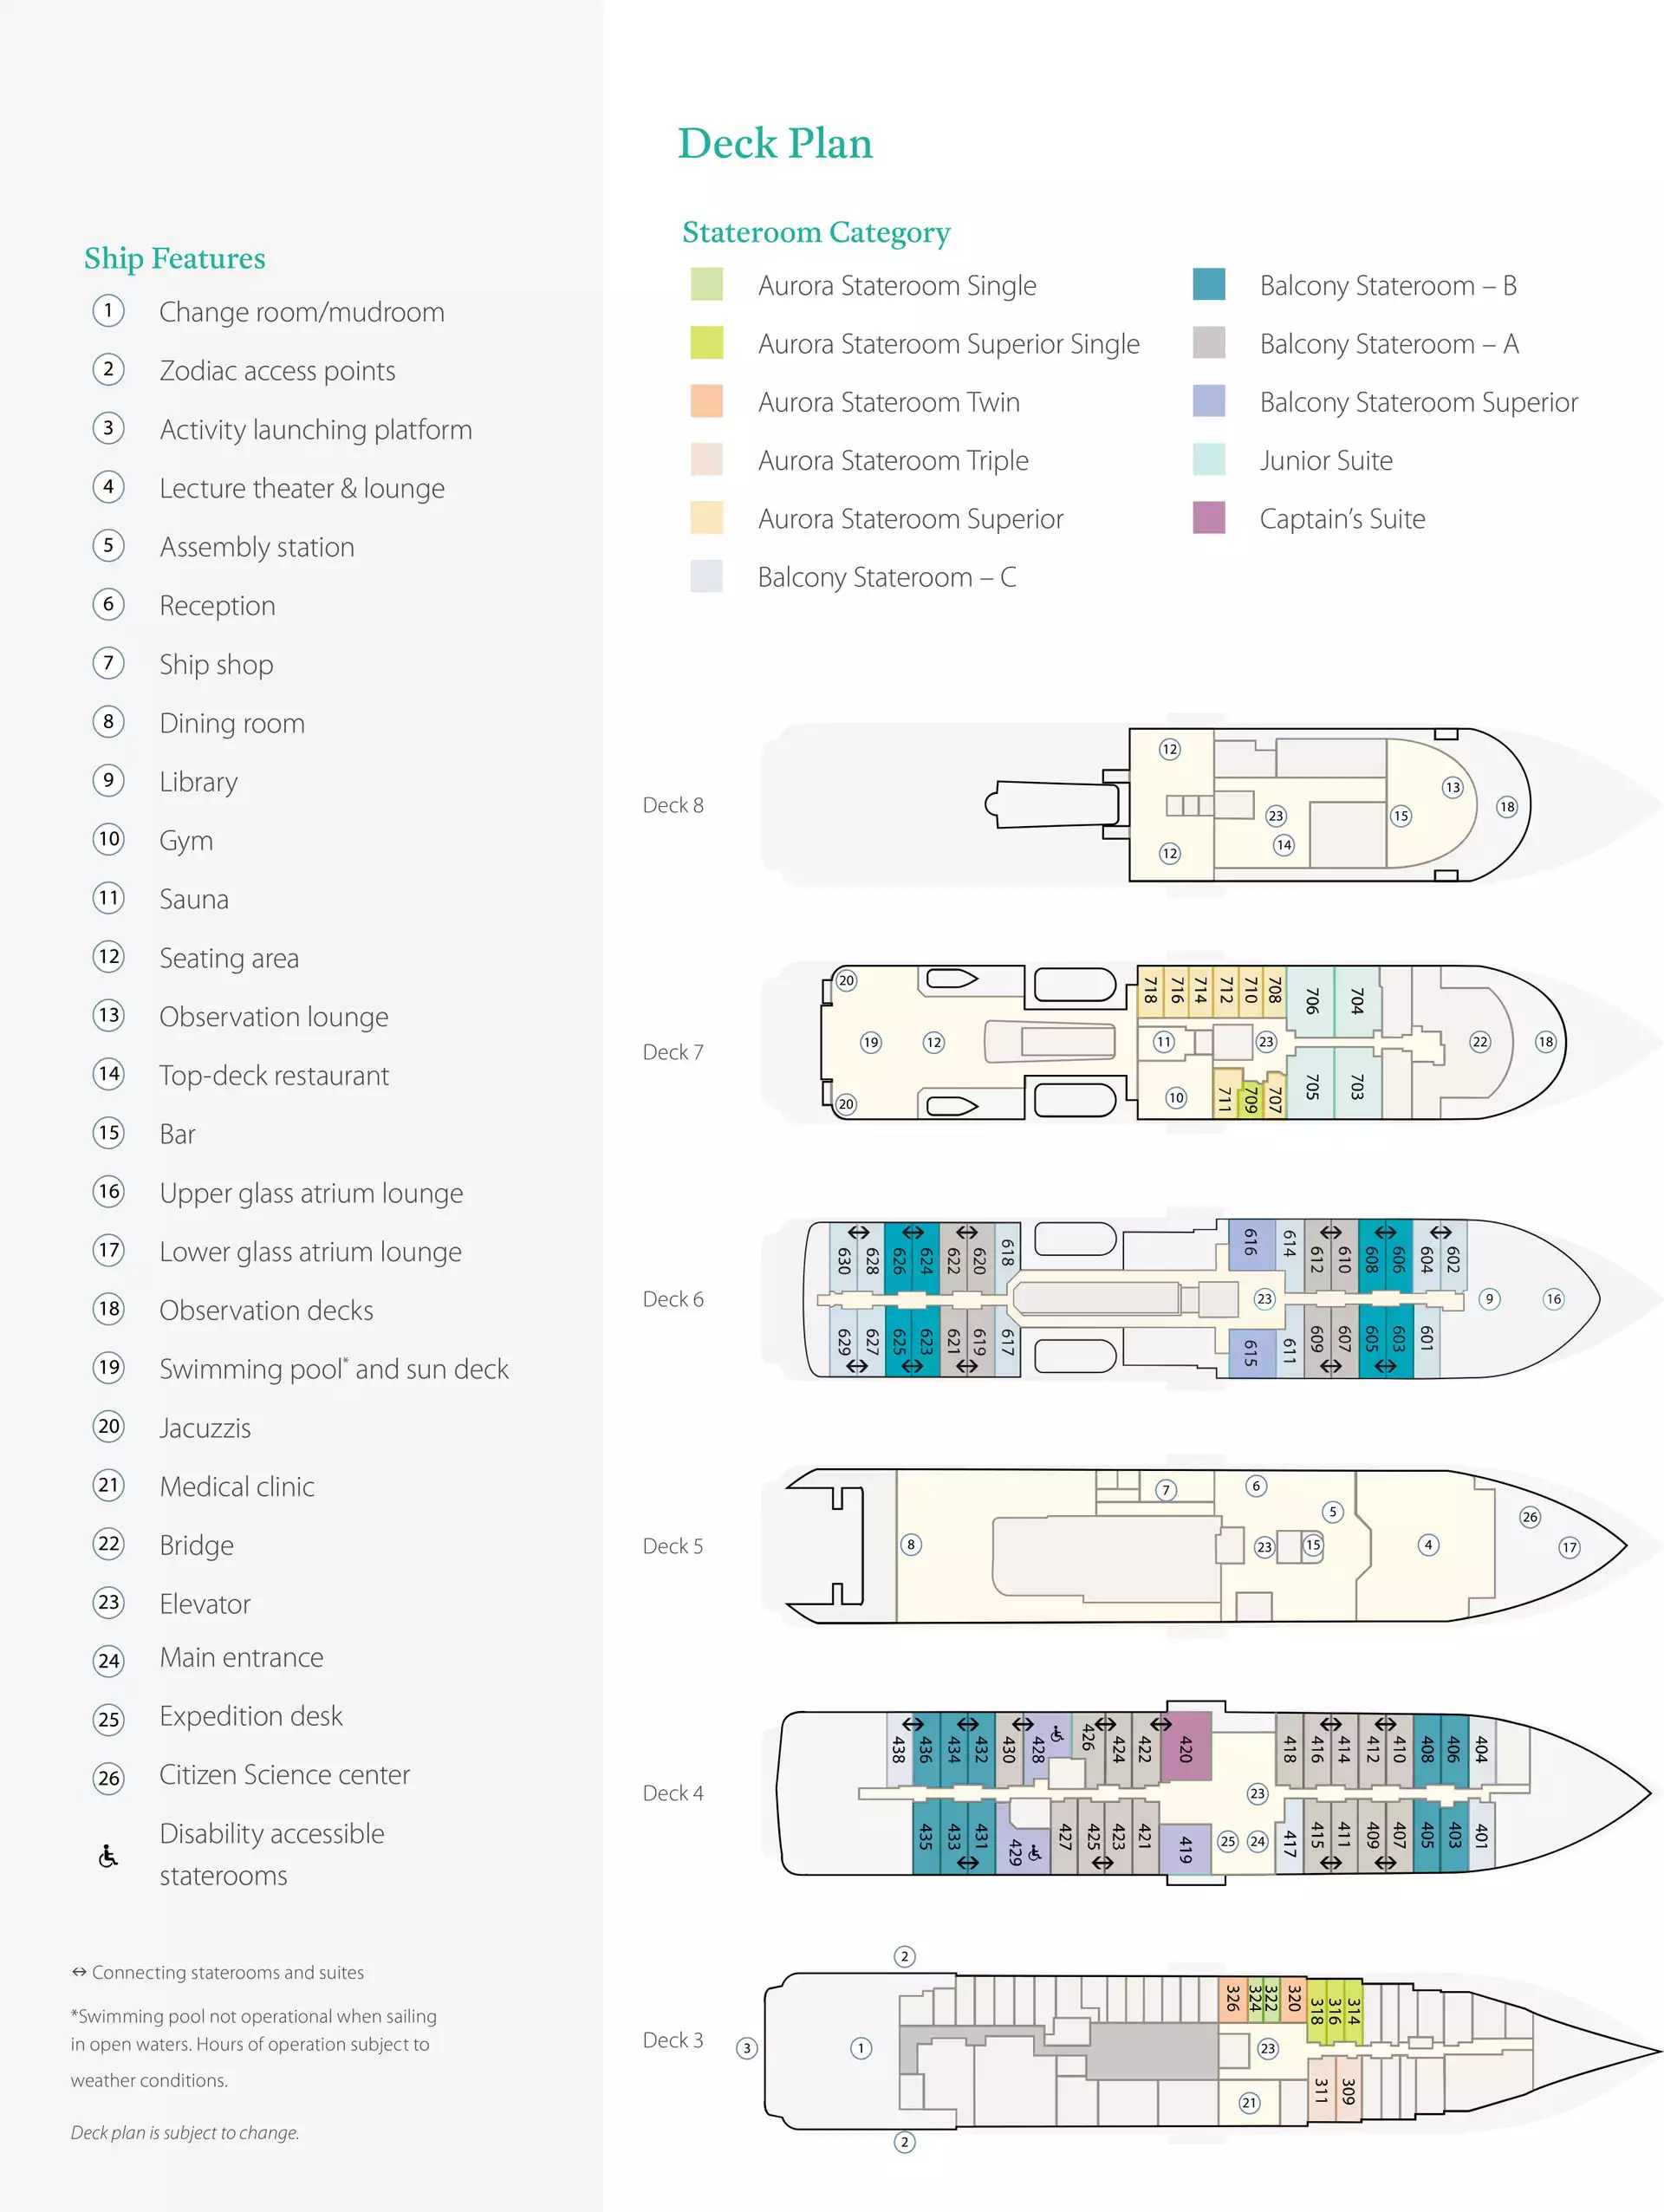 Deck plan of Douglas Mawson expedition ship with 8 decks, 11 cabin categories, various common areas & outdoor decks.